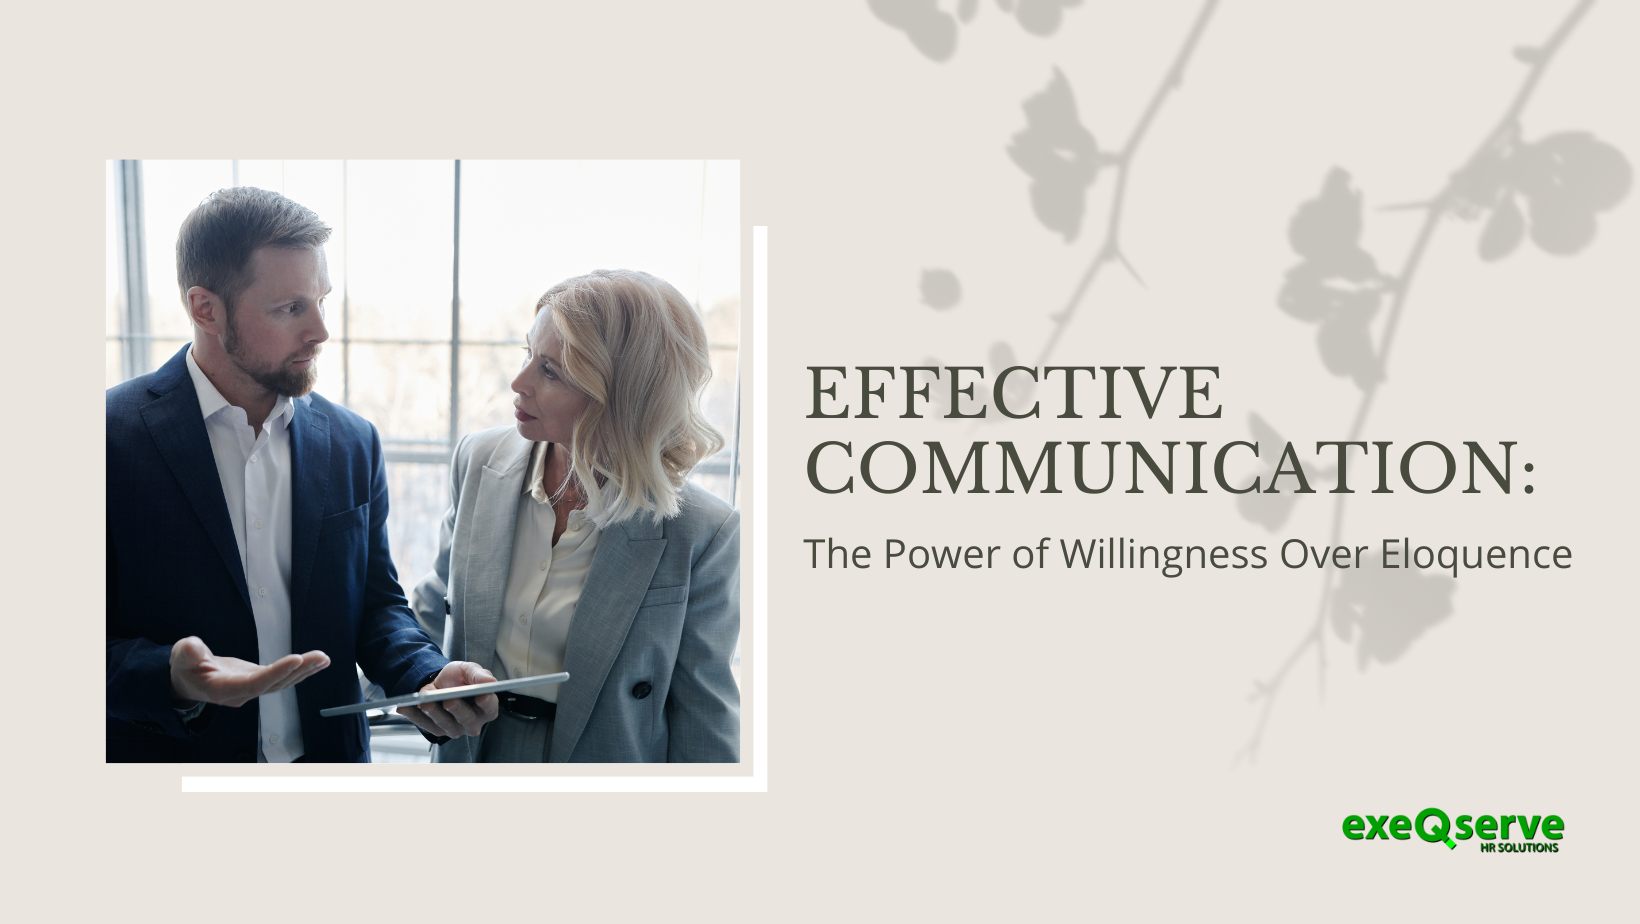 Effective Communication: The Power of Willingness Over Eloquence